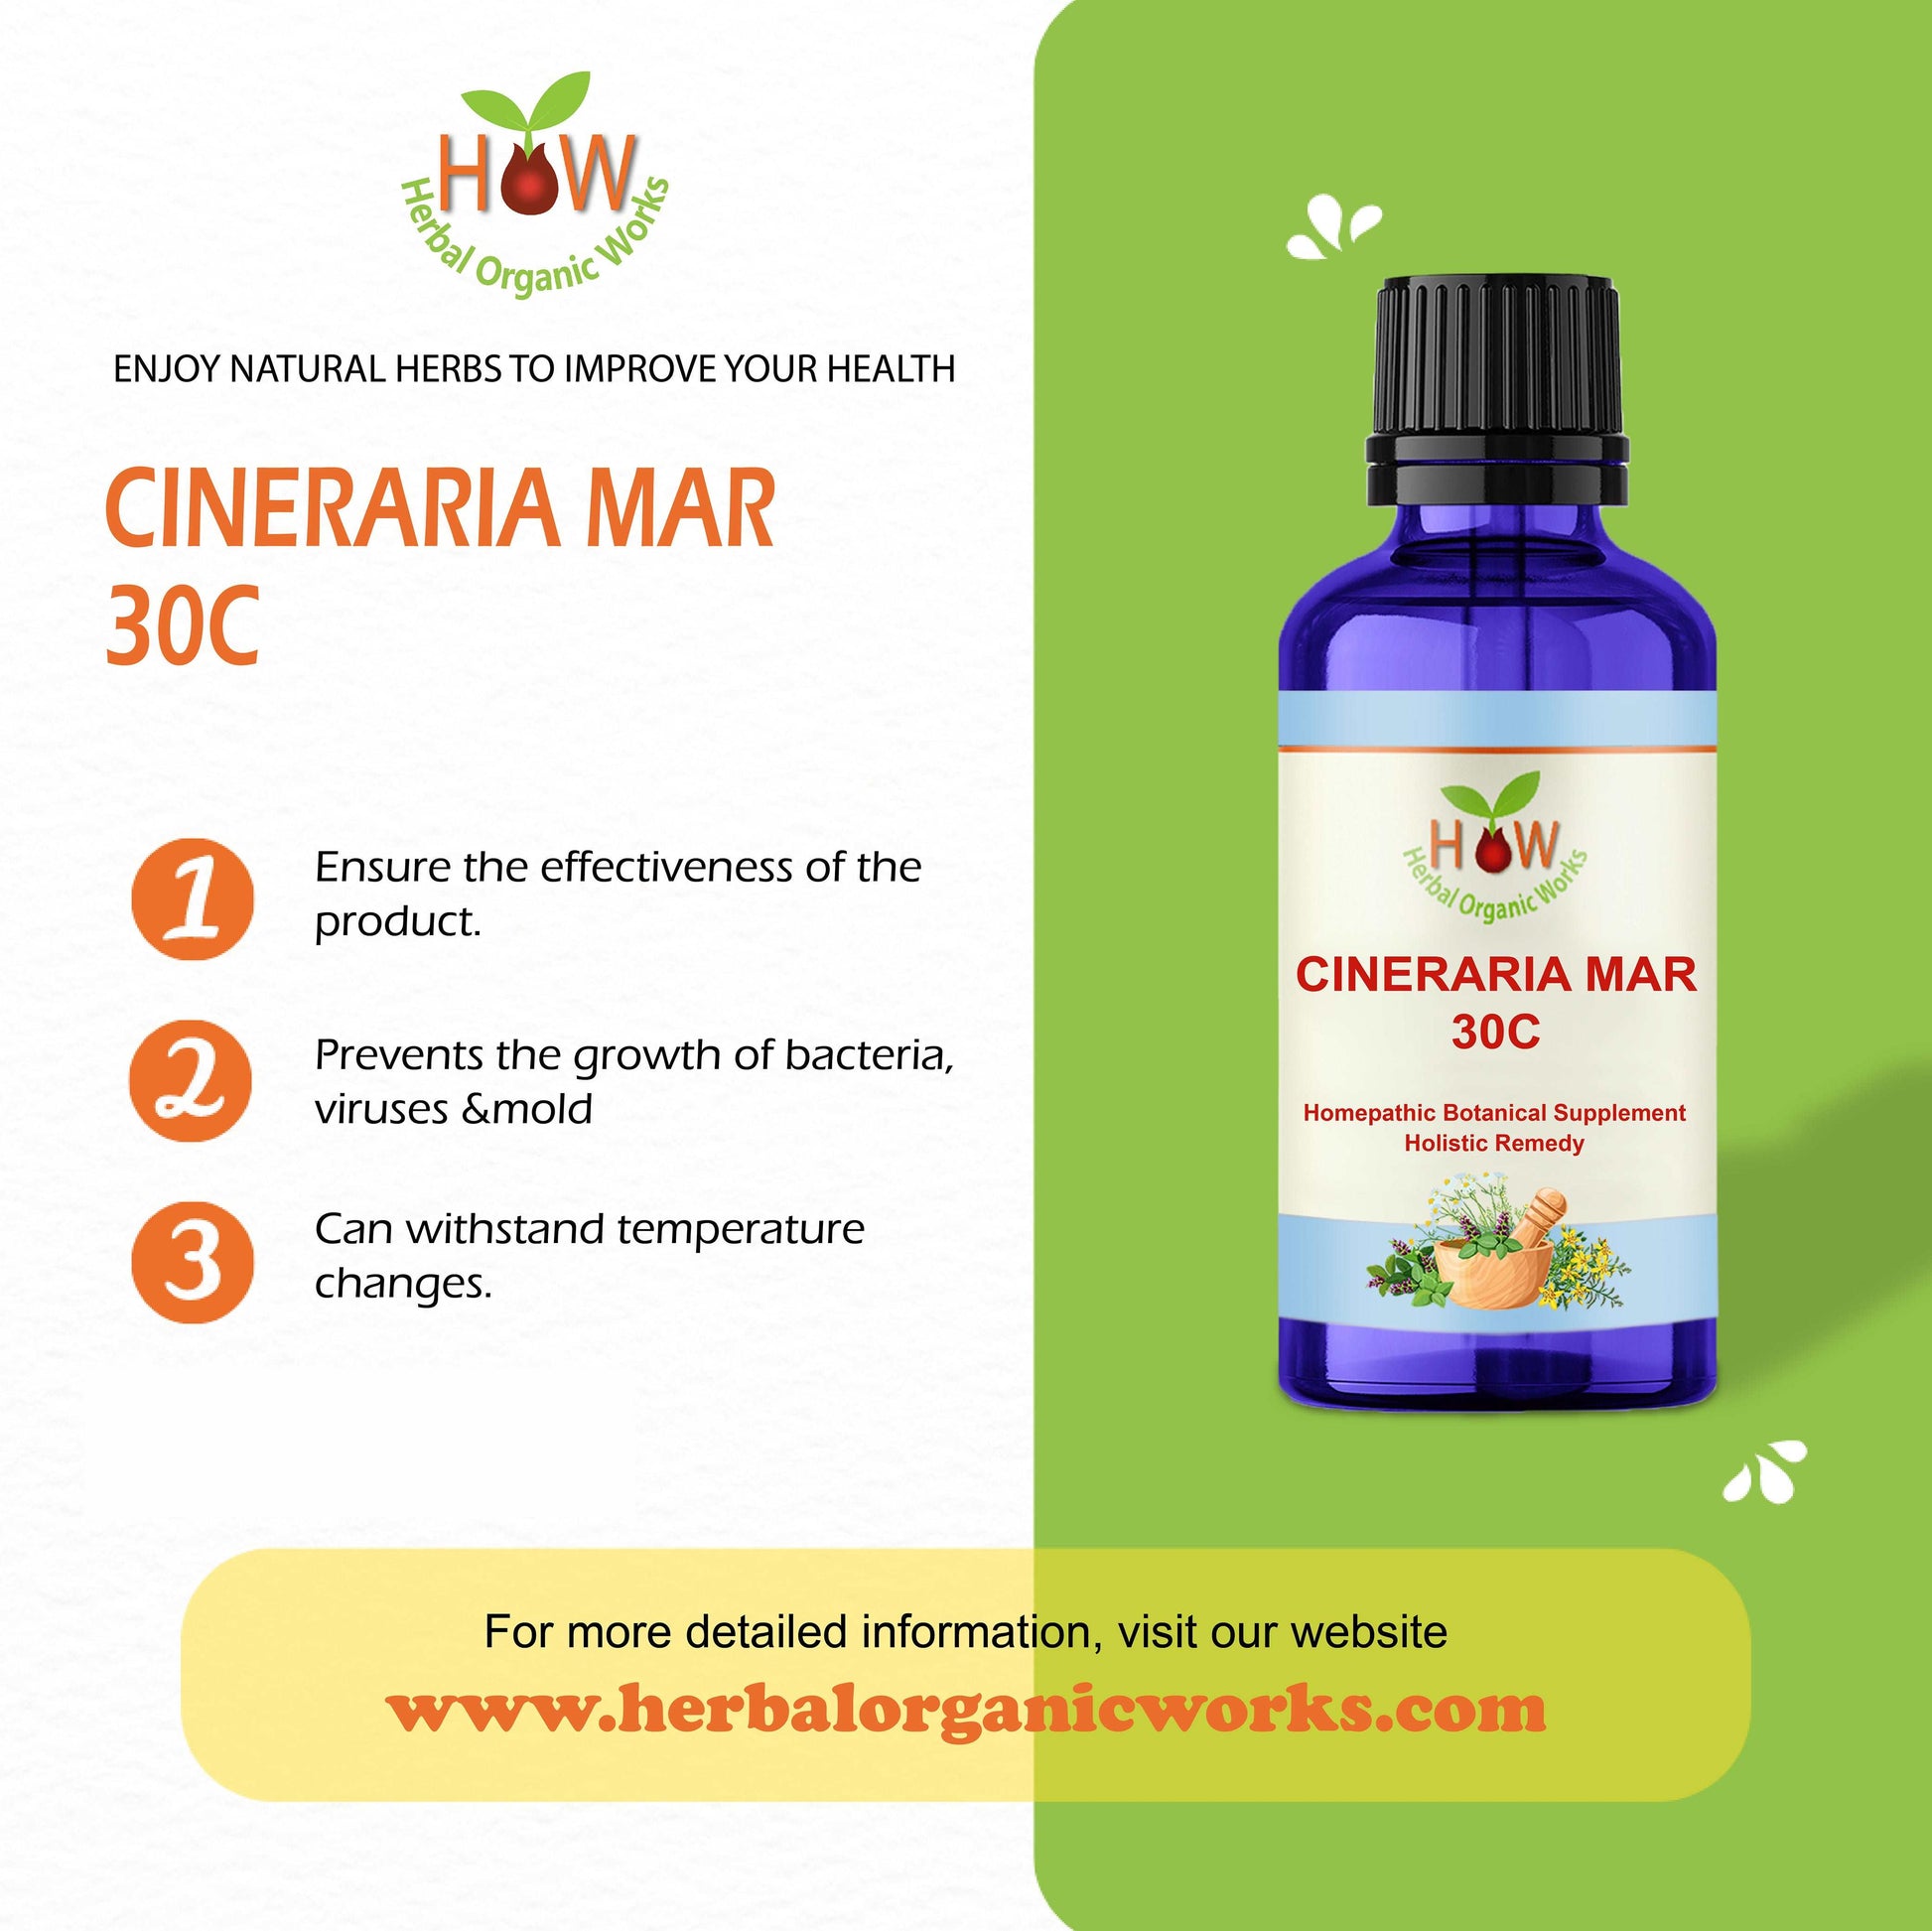 CINERARIA MAR 30C | SUPPORT FROM EYE INFECTION